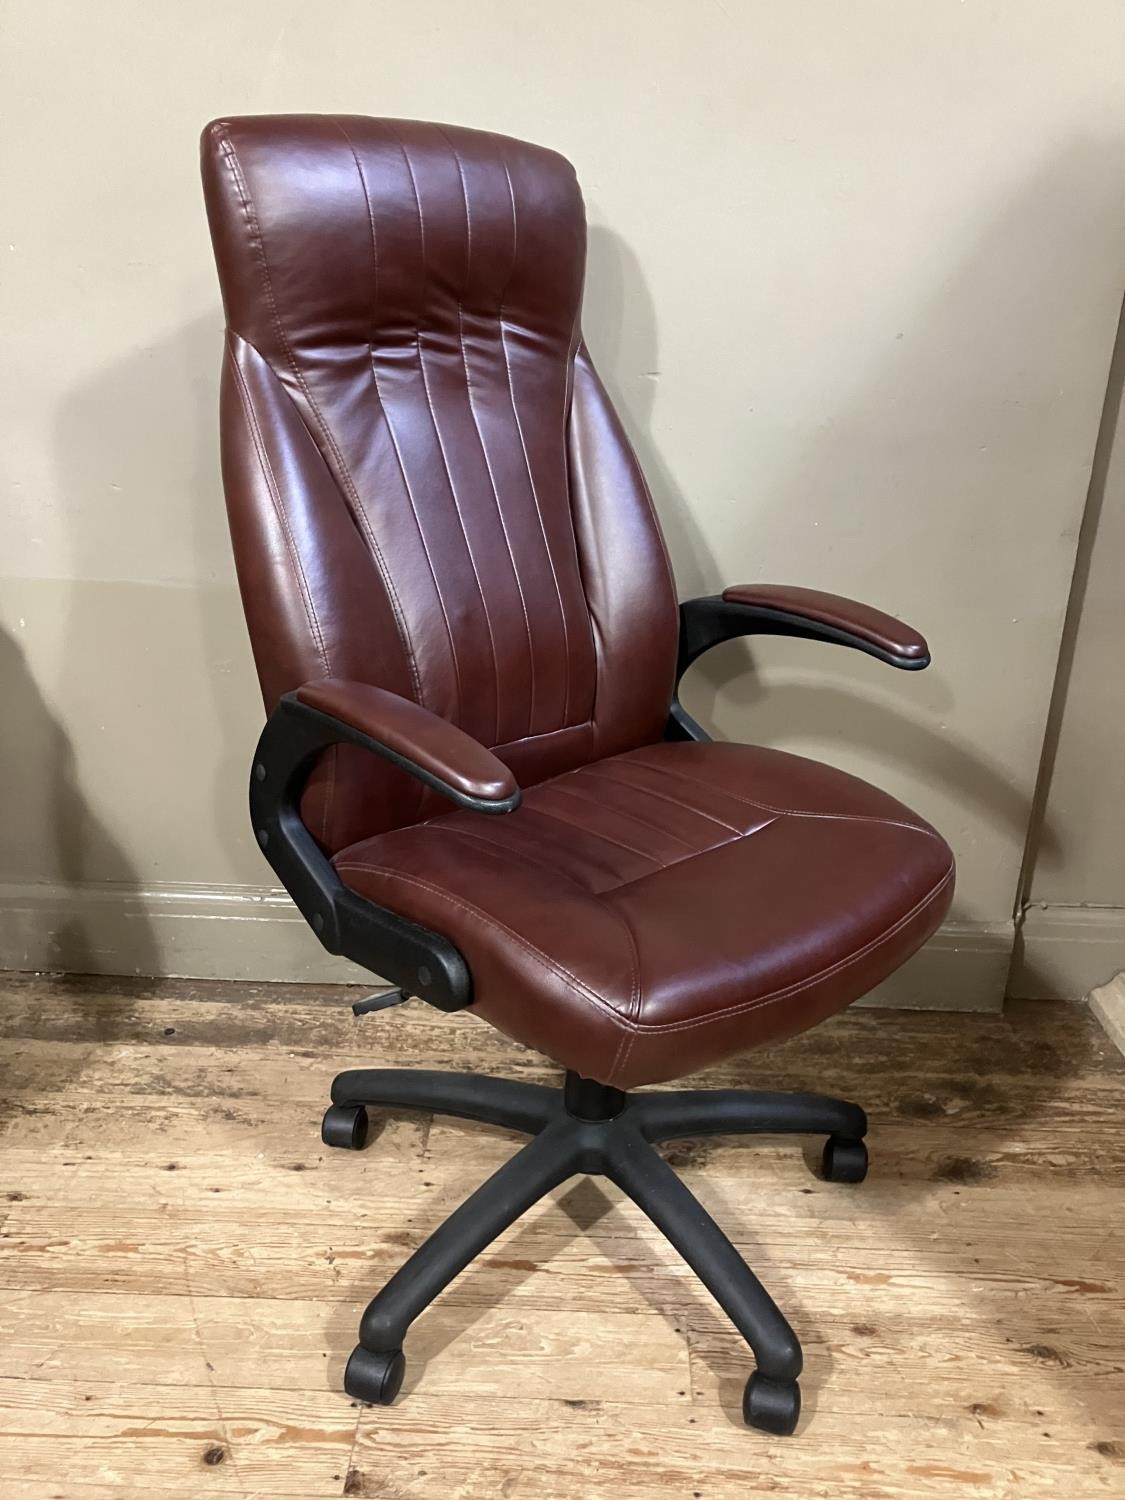 A swivel office chair in burgundy leather effect upholstery